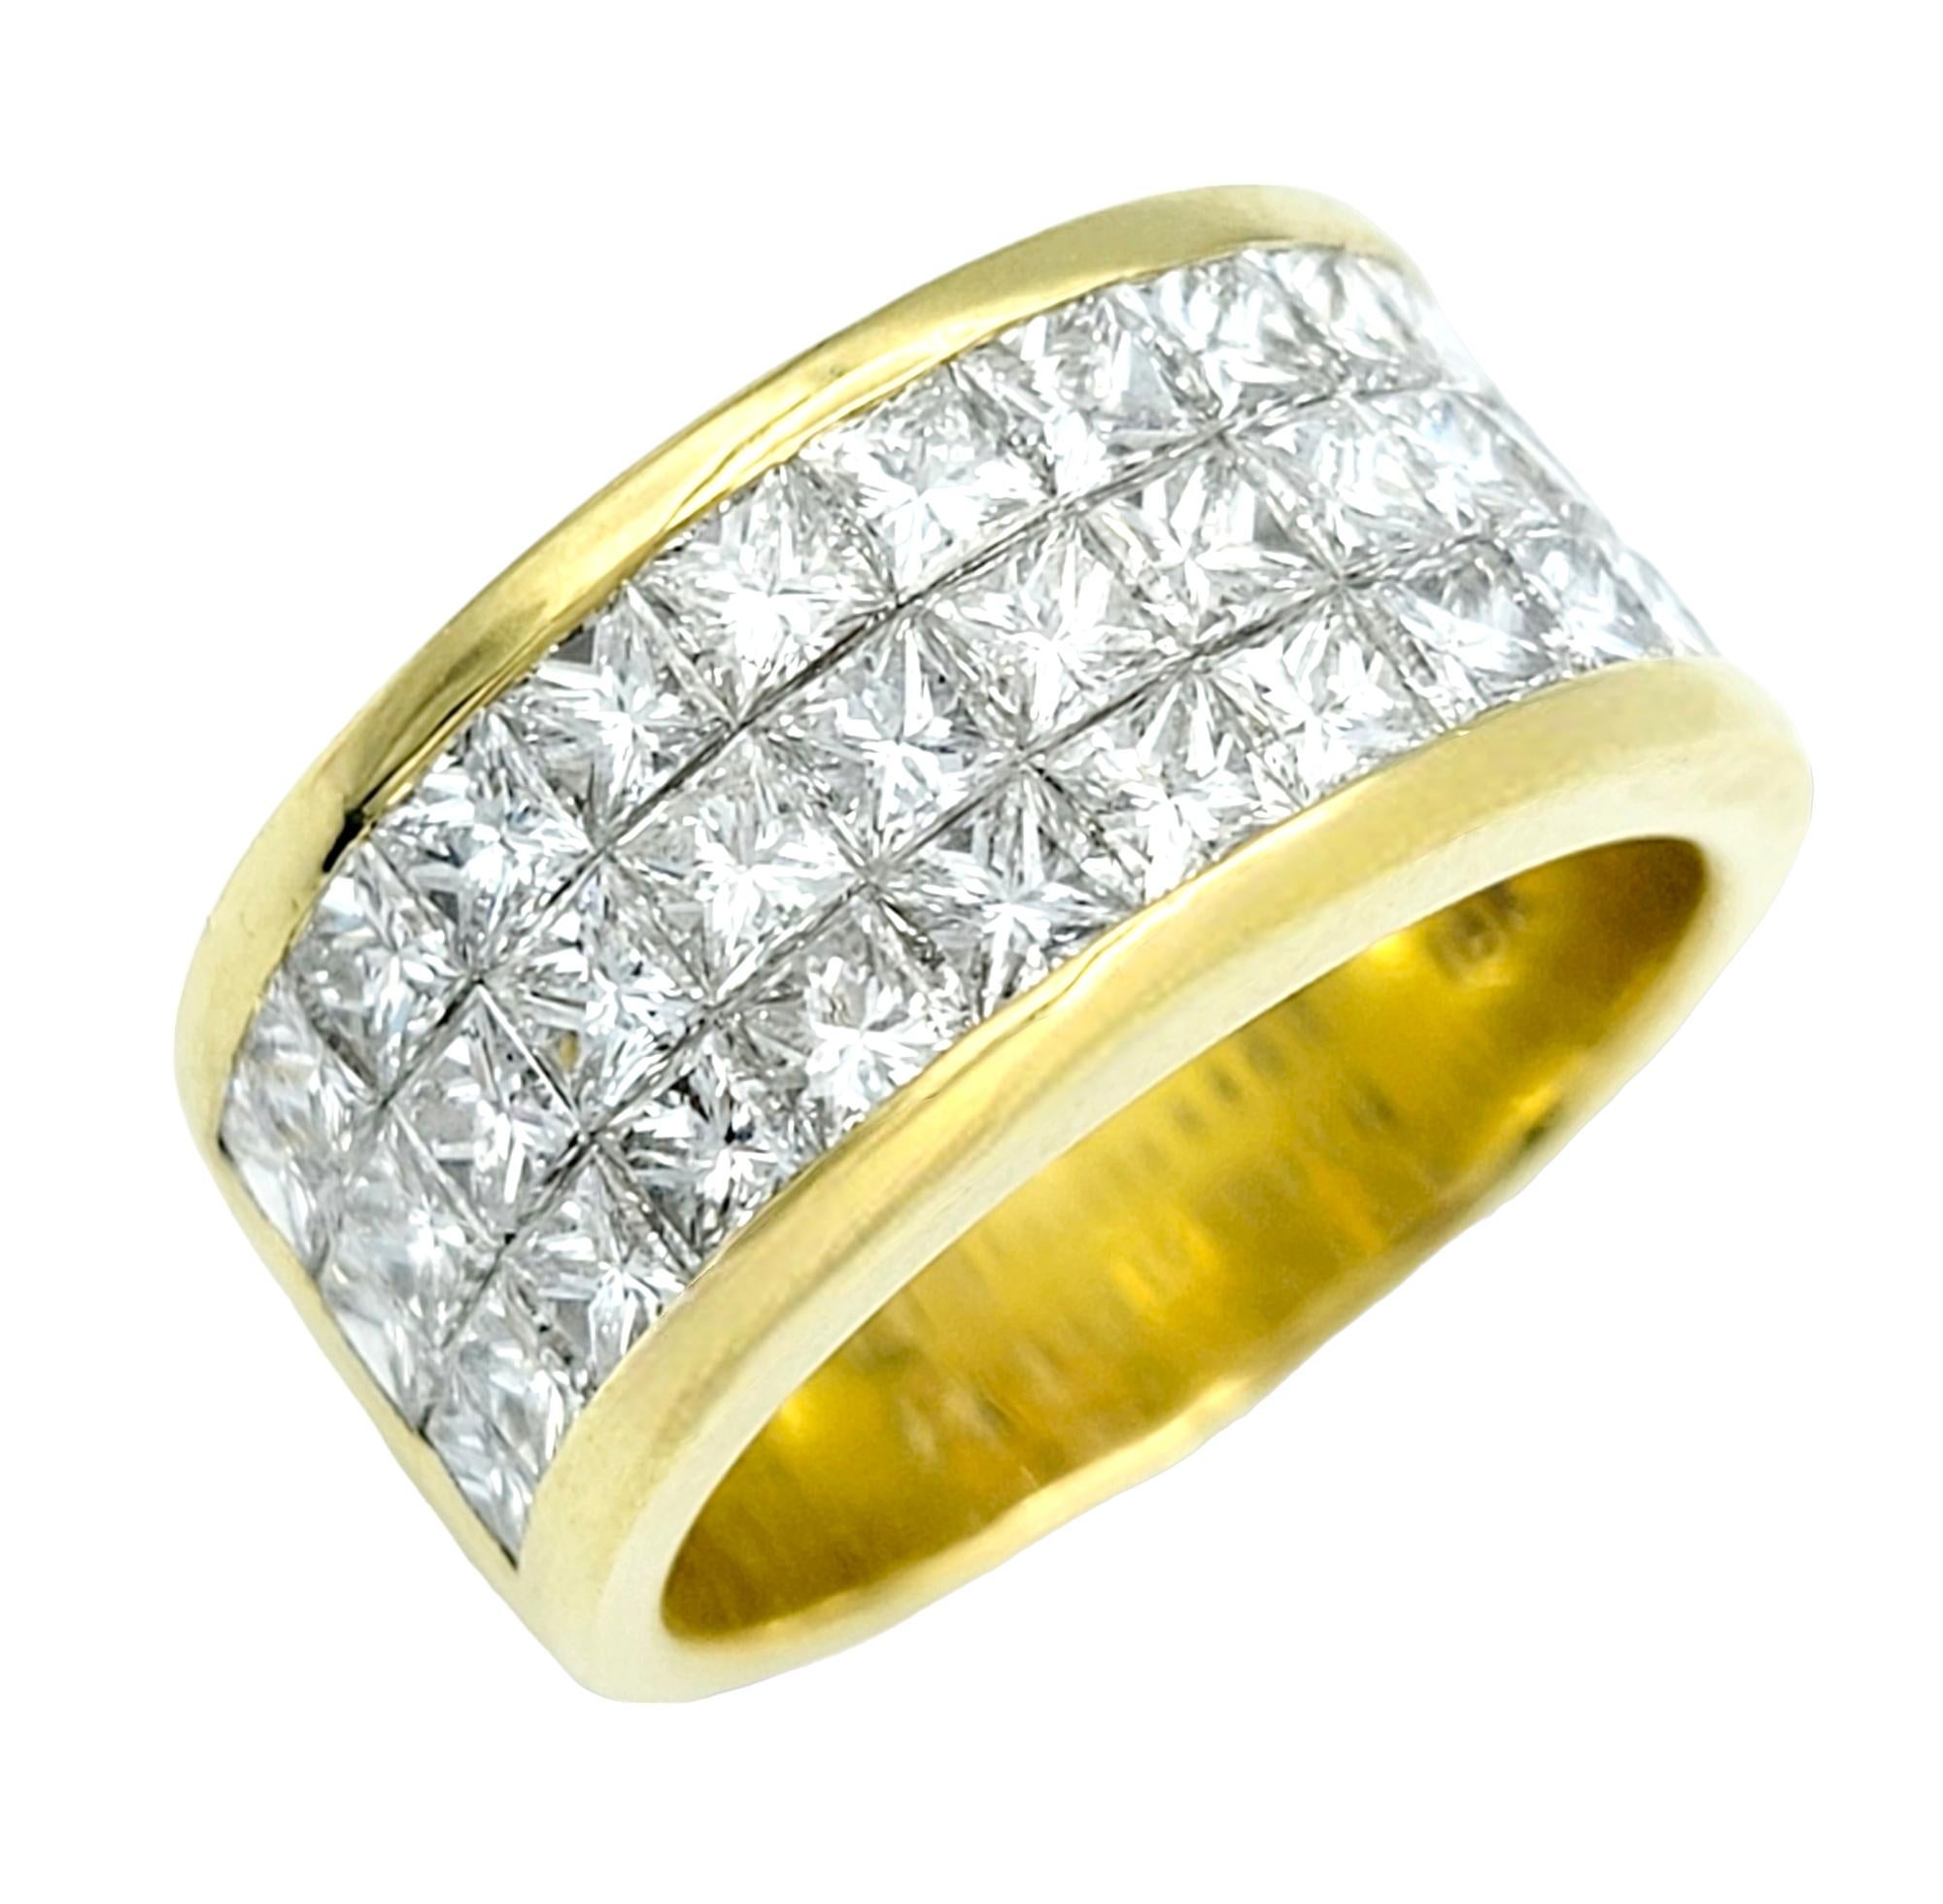 Ring size: 7.25

This stunningly sparkly 18 karat gold band ring is a dazzling testament to timeless elegance and contemporary sophistication. The focal point of this stunning ring are the three rows of shimmering princess-cut diamonds that are